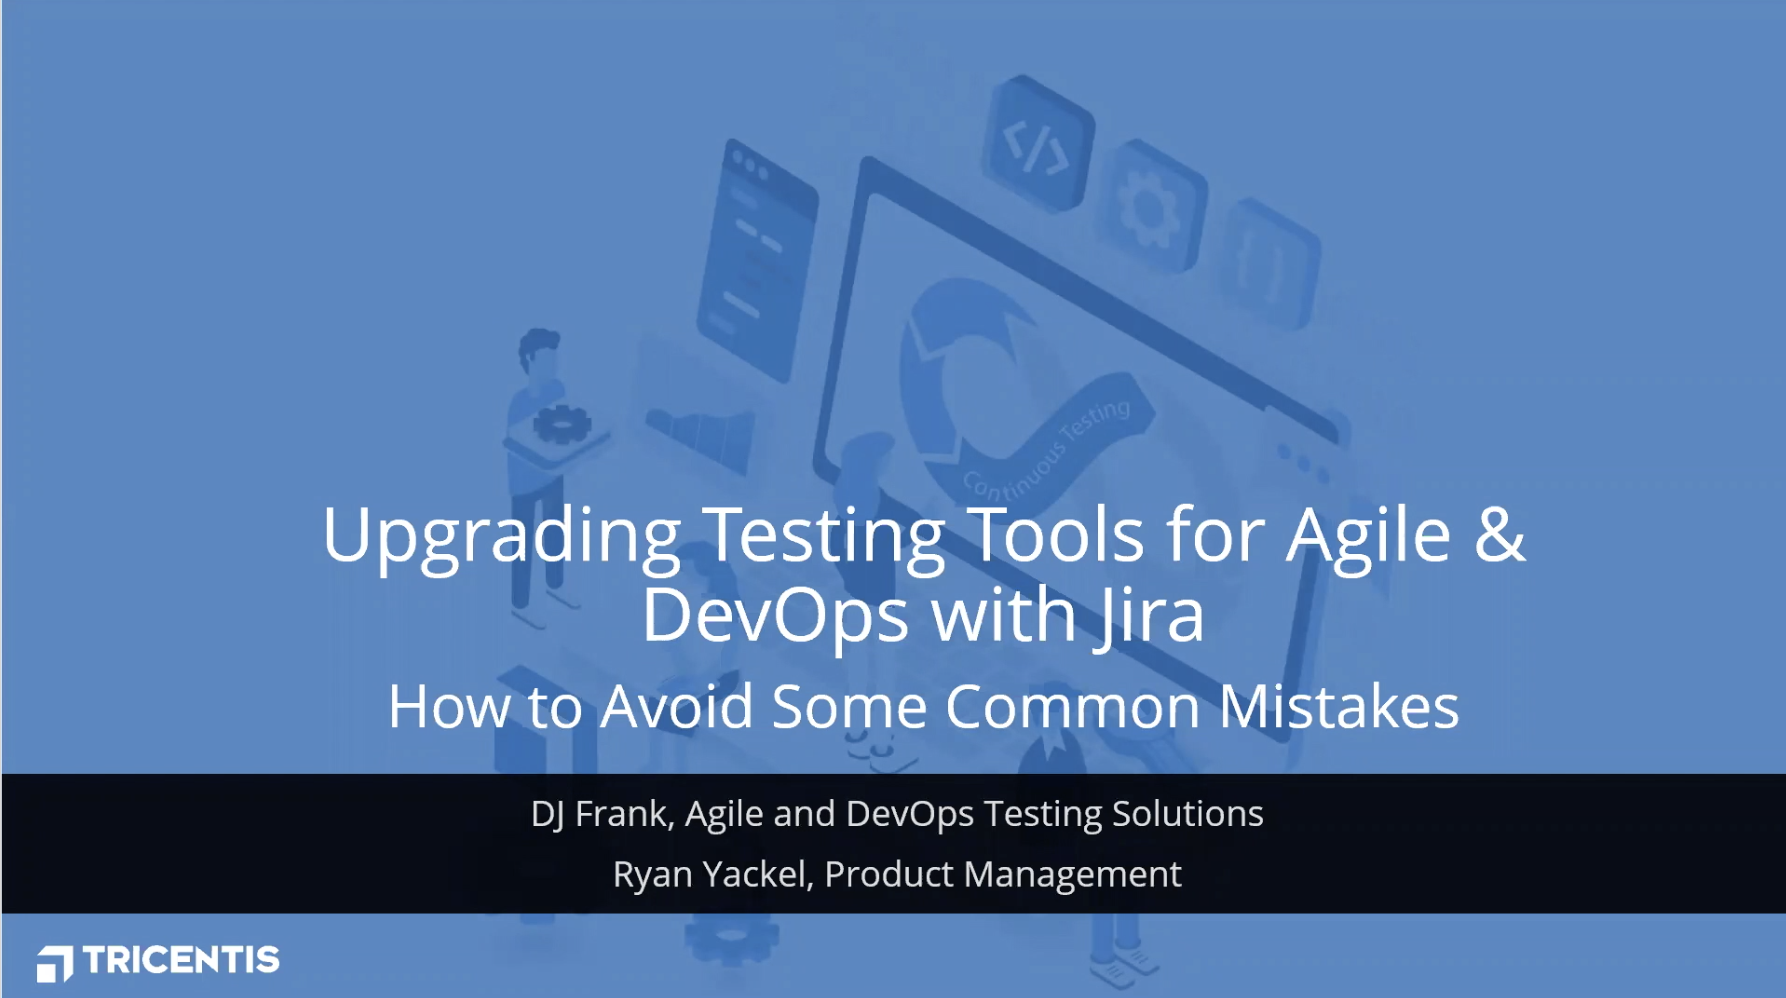 Screenshot 2020 10 28 at 12.53.55 - Upgrading Testing Tools for Agile and DevOps with Jira - Avoid These Common Mistakes